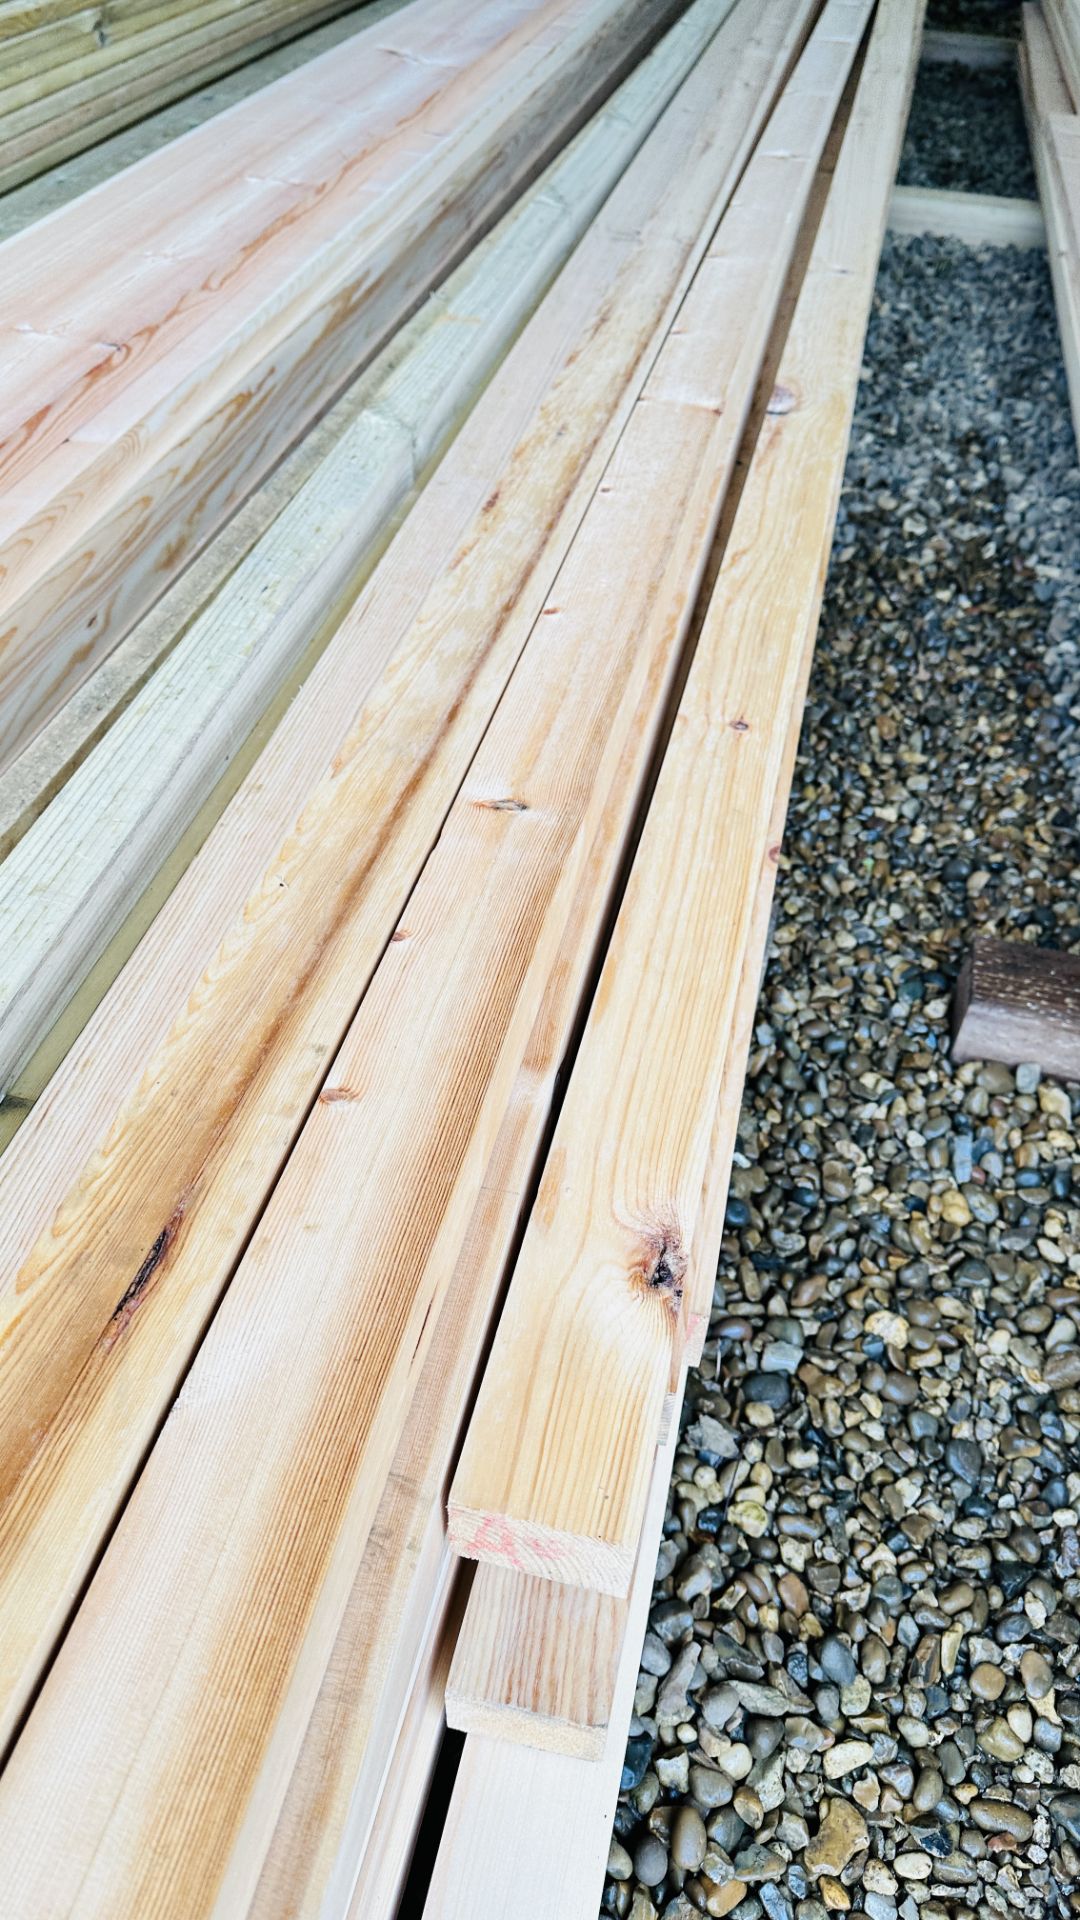 26 X 70MM X 35MM PLANED TIMBER, MINIMUM LENGTH APPROX 3.6 METRE, MAXIMUM APPROX LENGTH 5. - Image 3 of 4